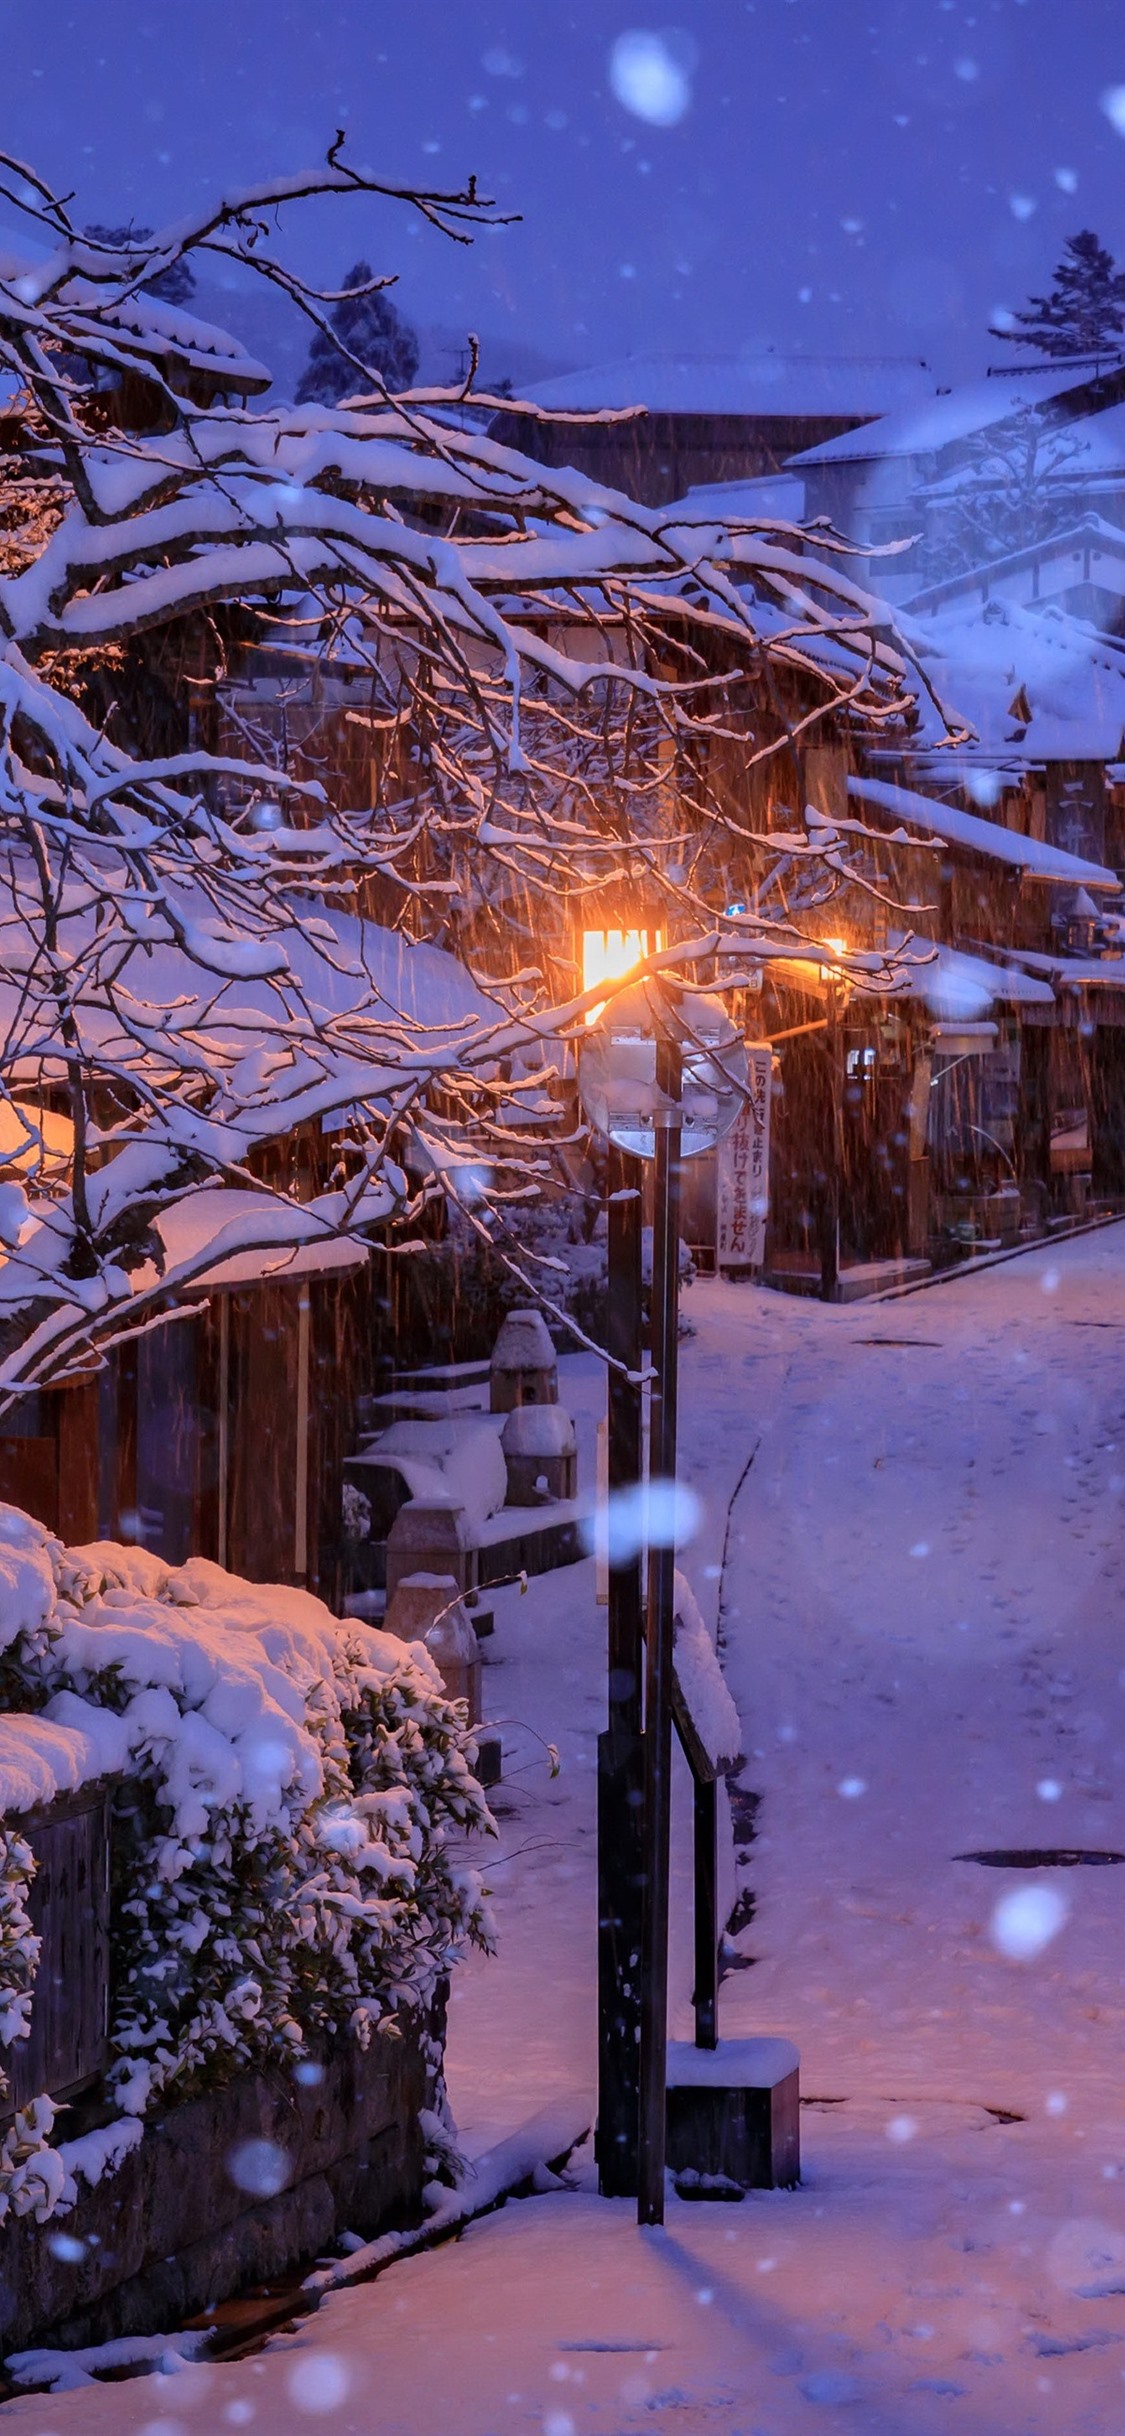 Iphone Wallpaper Japan Kyoto Houses Snow Trees Kyoto Wallpaper 4k 1125x2436 Wallpaper Teahub Io